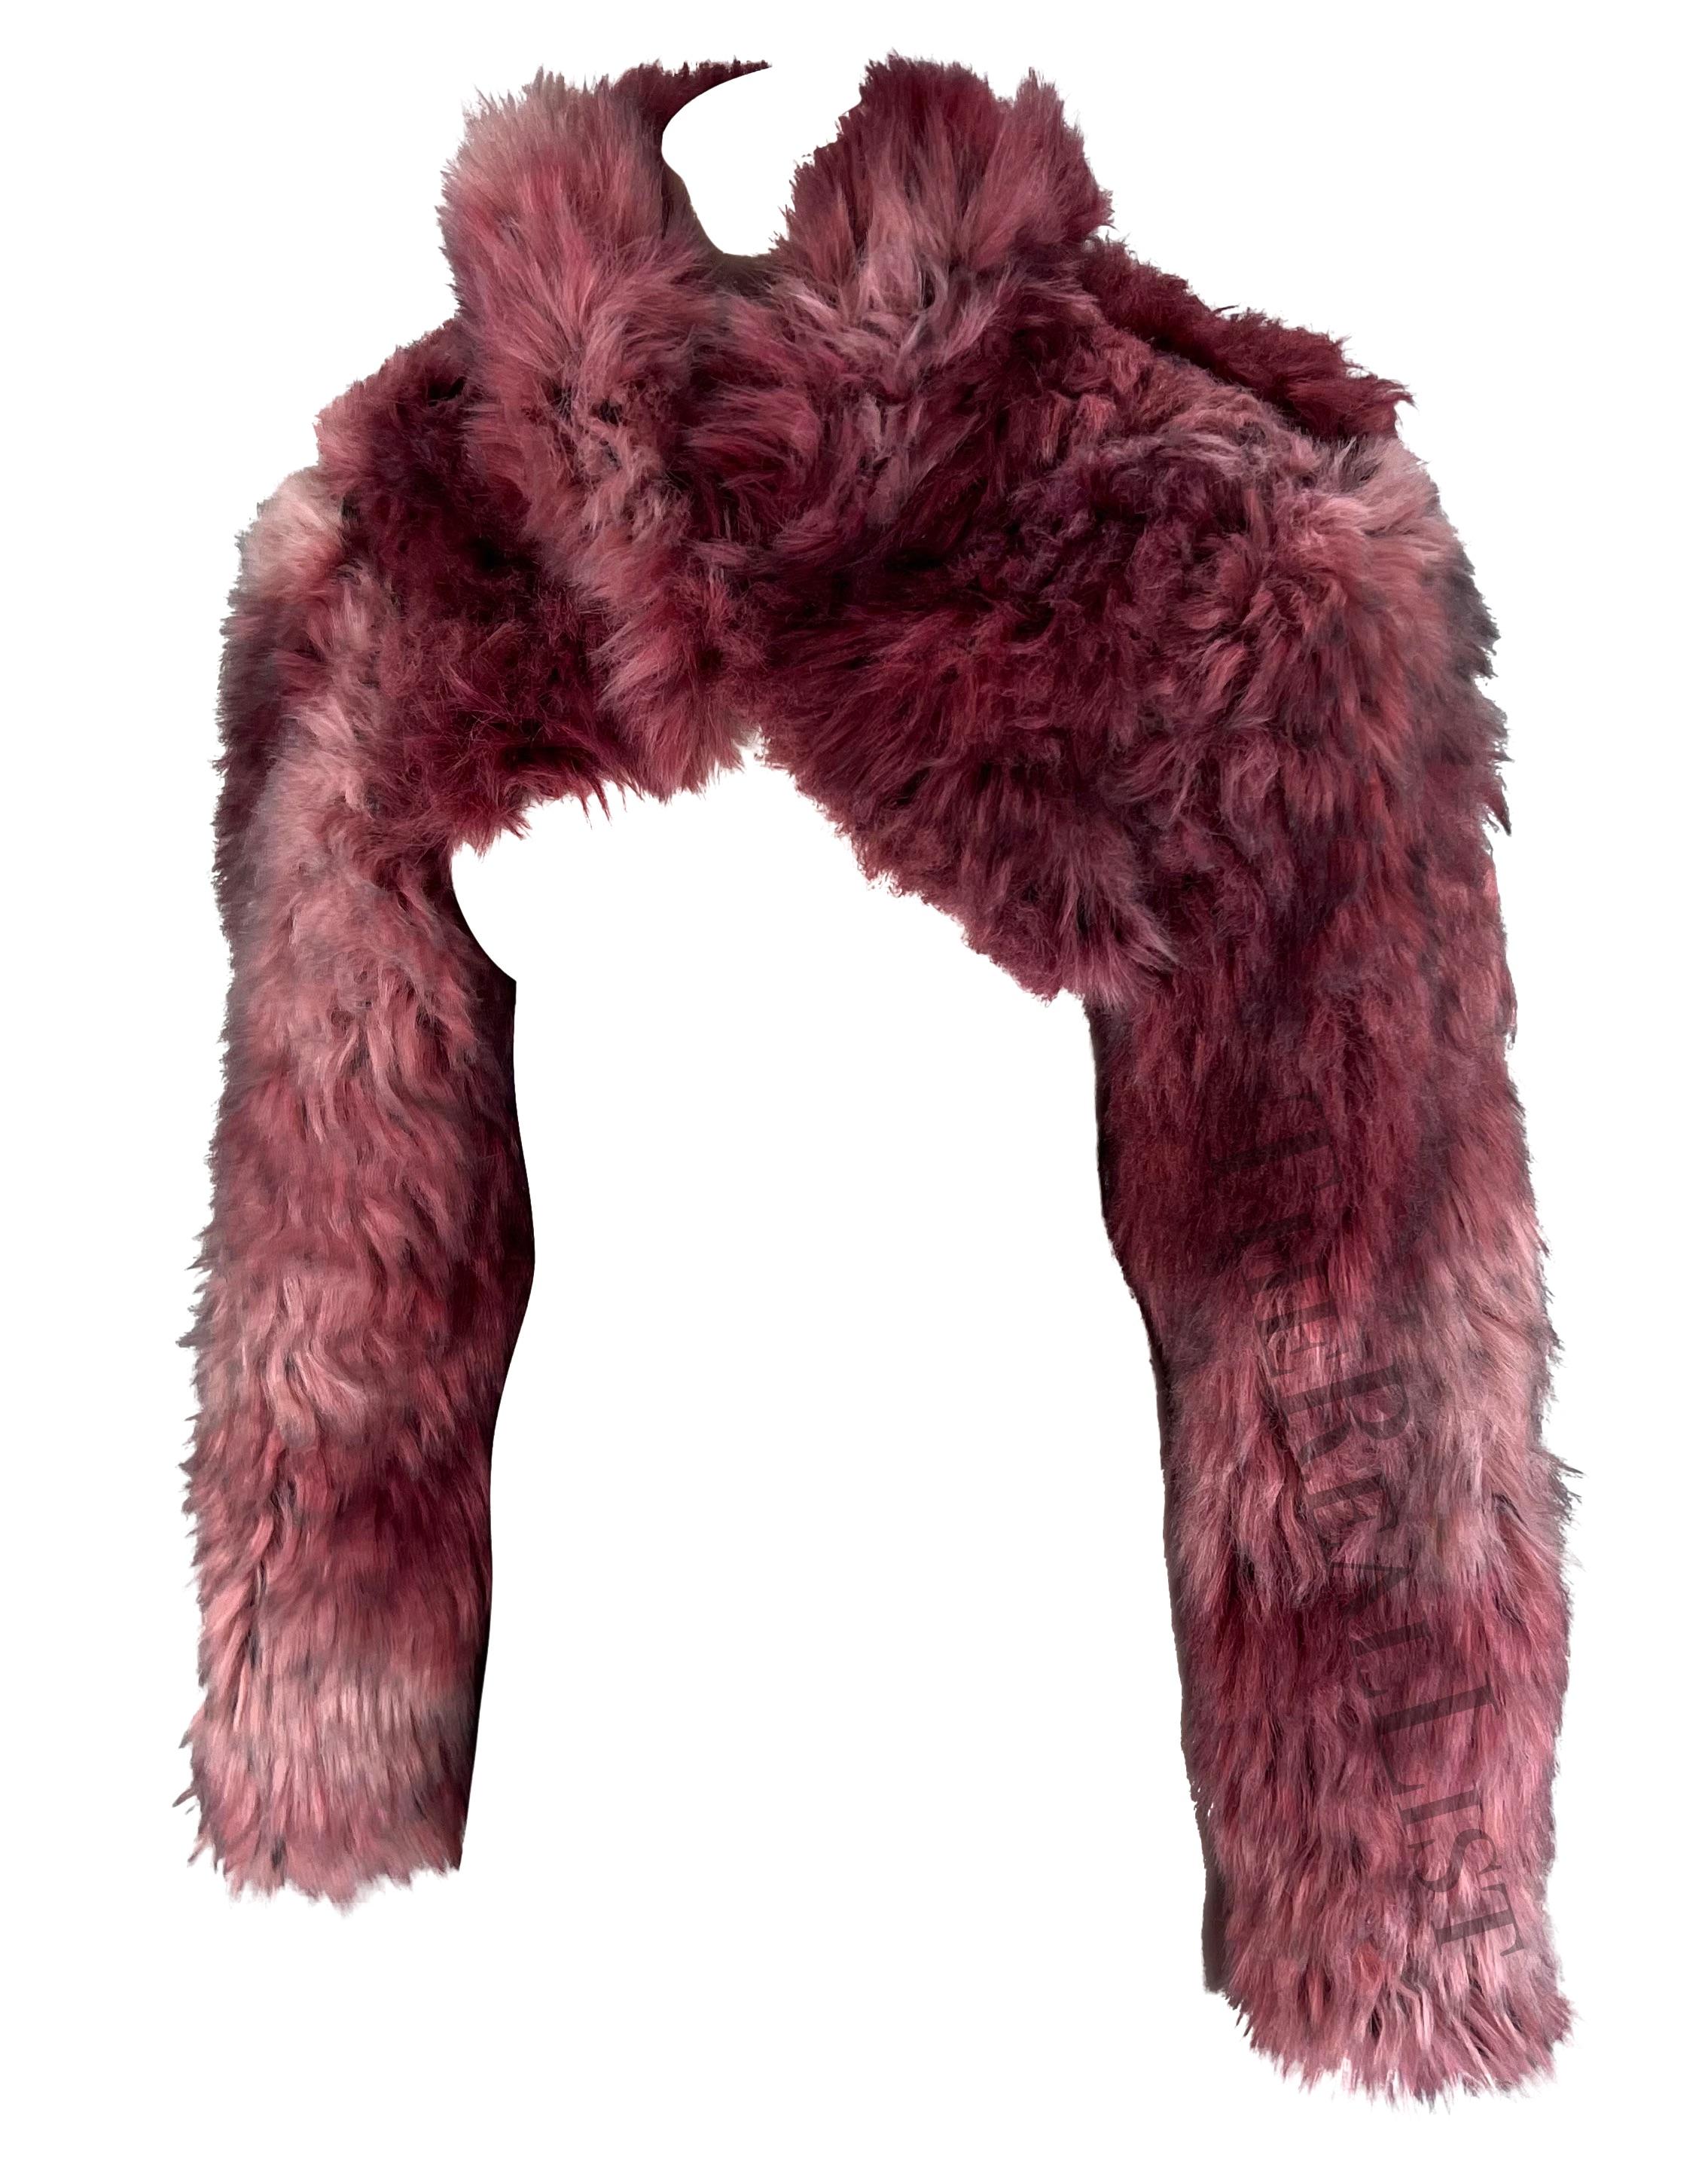 TheRealList presents: a fabulous pink faux fur Moschino Couture cropped bolero. From the Spring/Summer 1994 'Repetita Juvant' collection, this bolero is from the 10-year retrospective collection which was also Franco Moschino's final collection